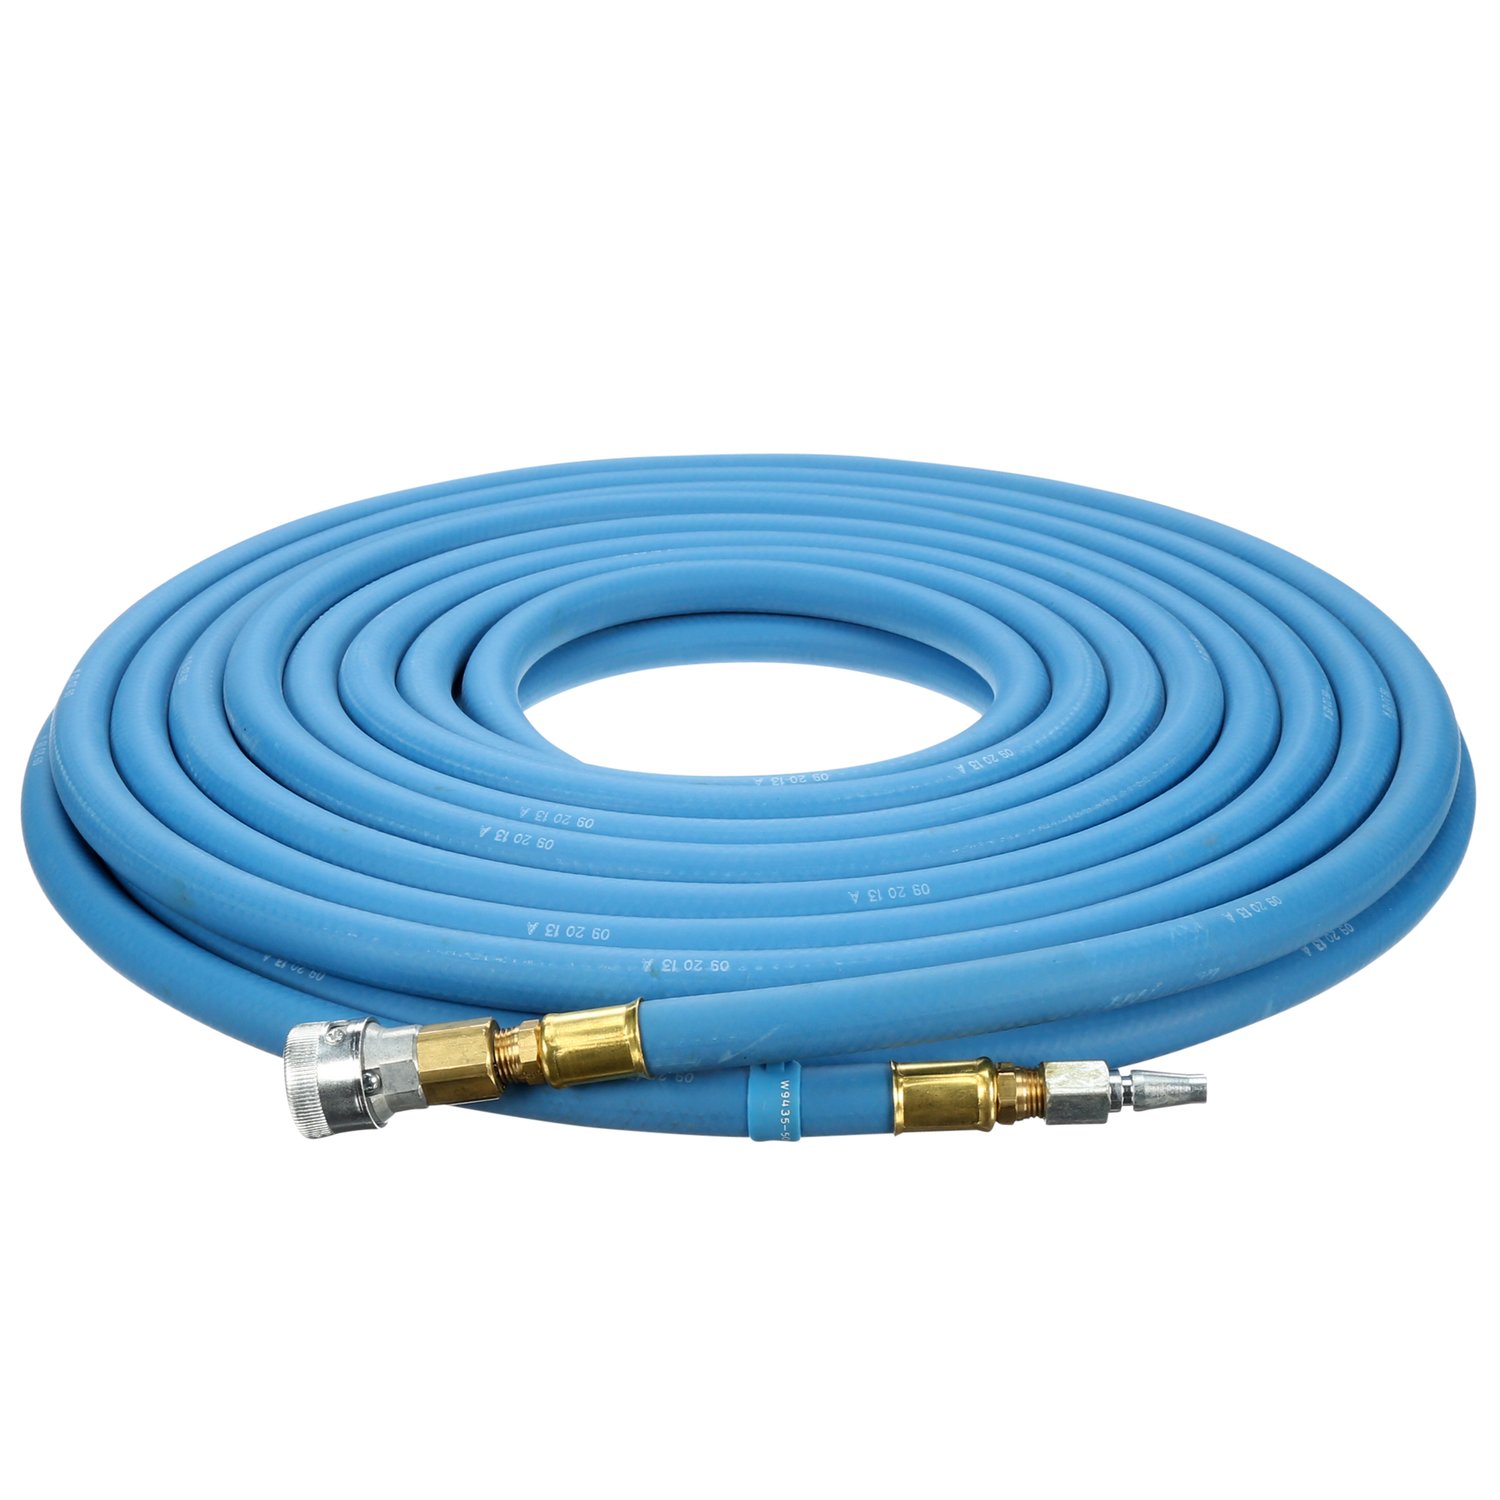 7000126388 - 3M Supplied Air Hose W-9445-25, 25 ft, 3/8 in ID, Schrader Fittings,
High Pressure, 1 ea/Case